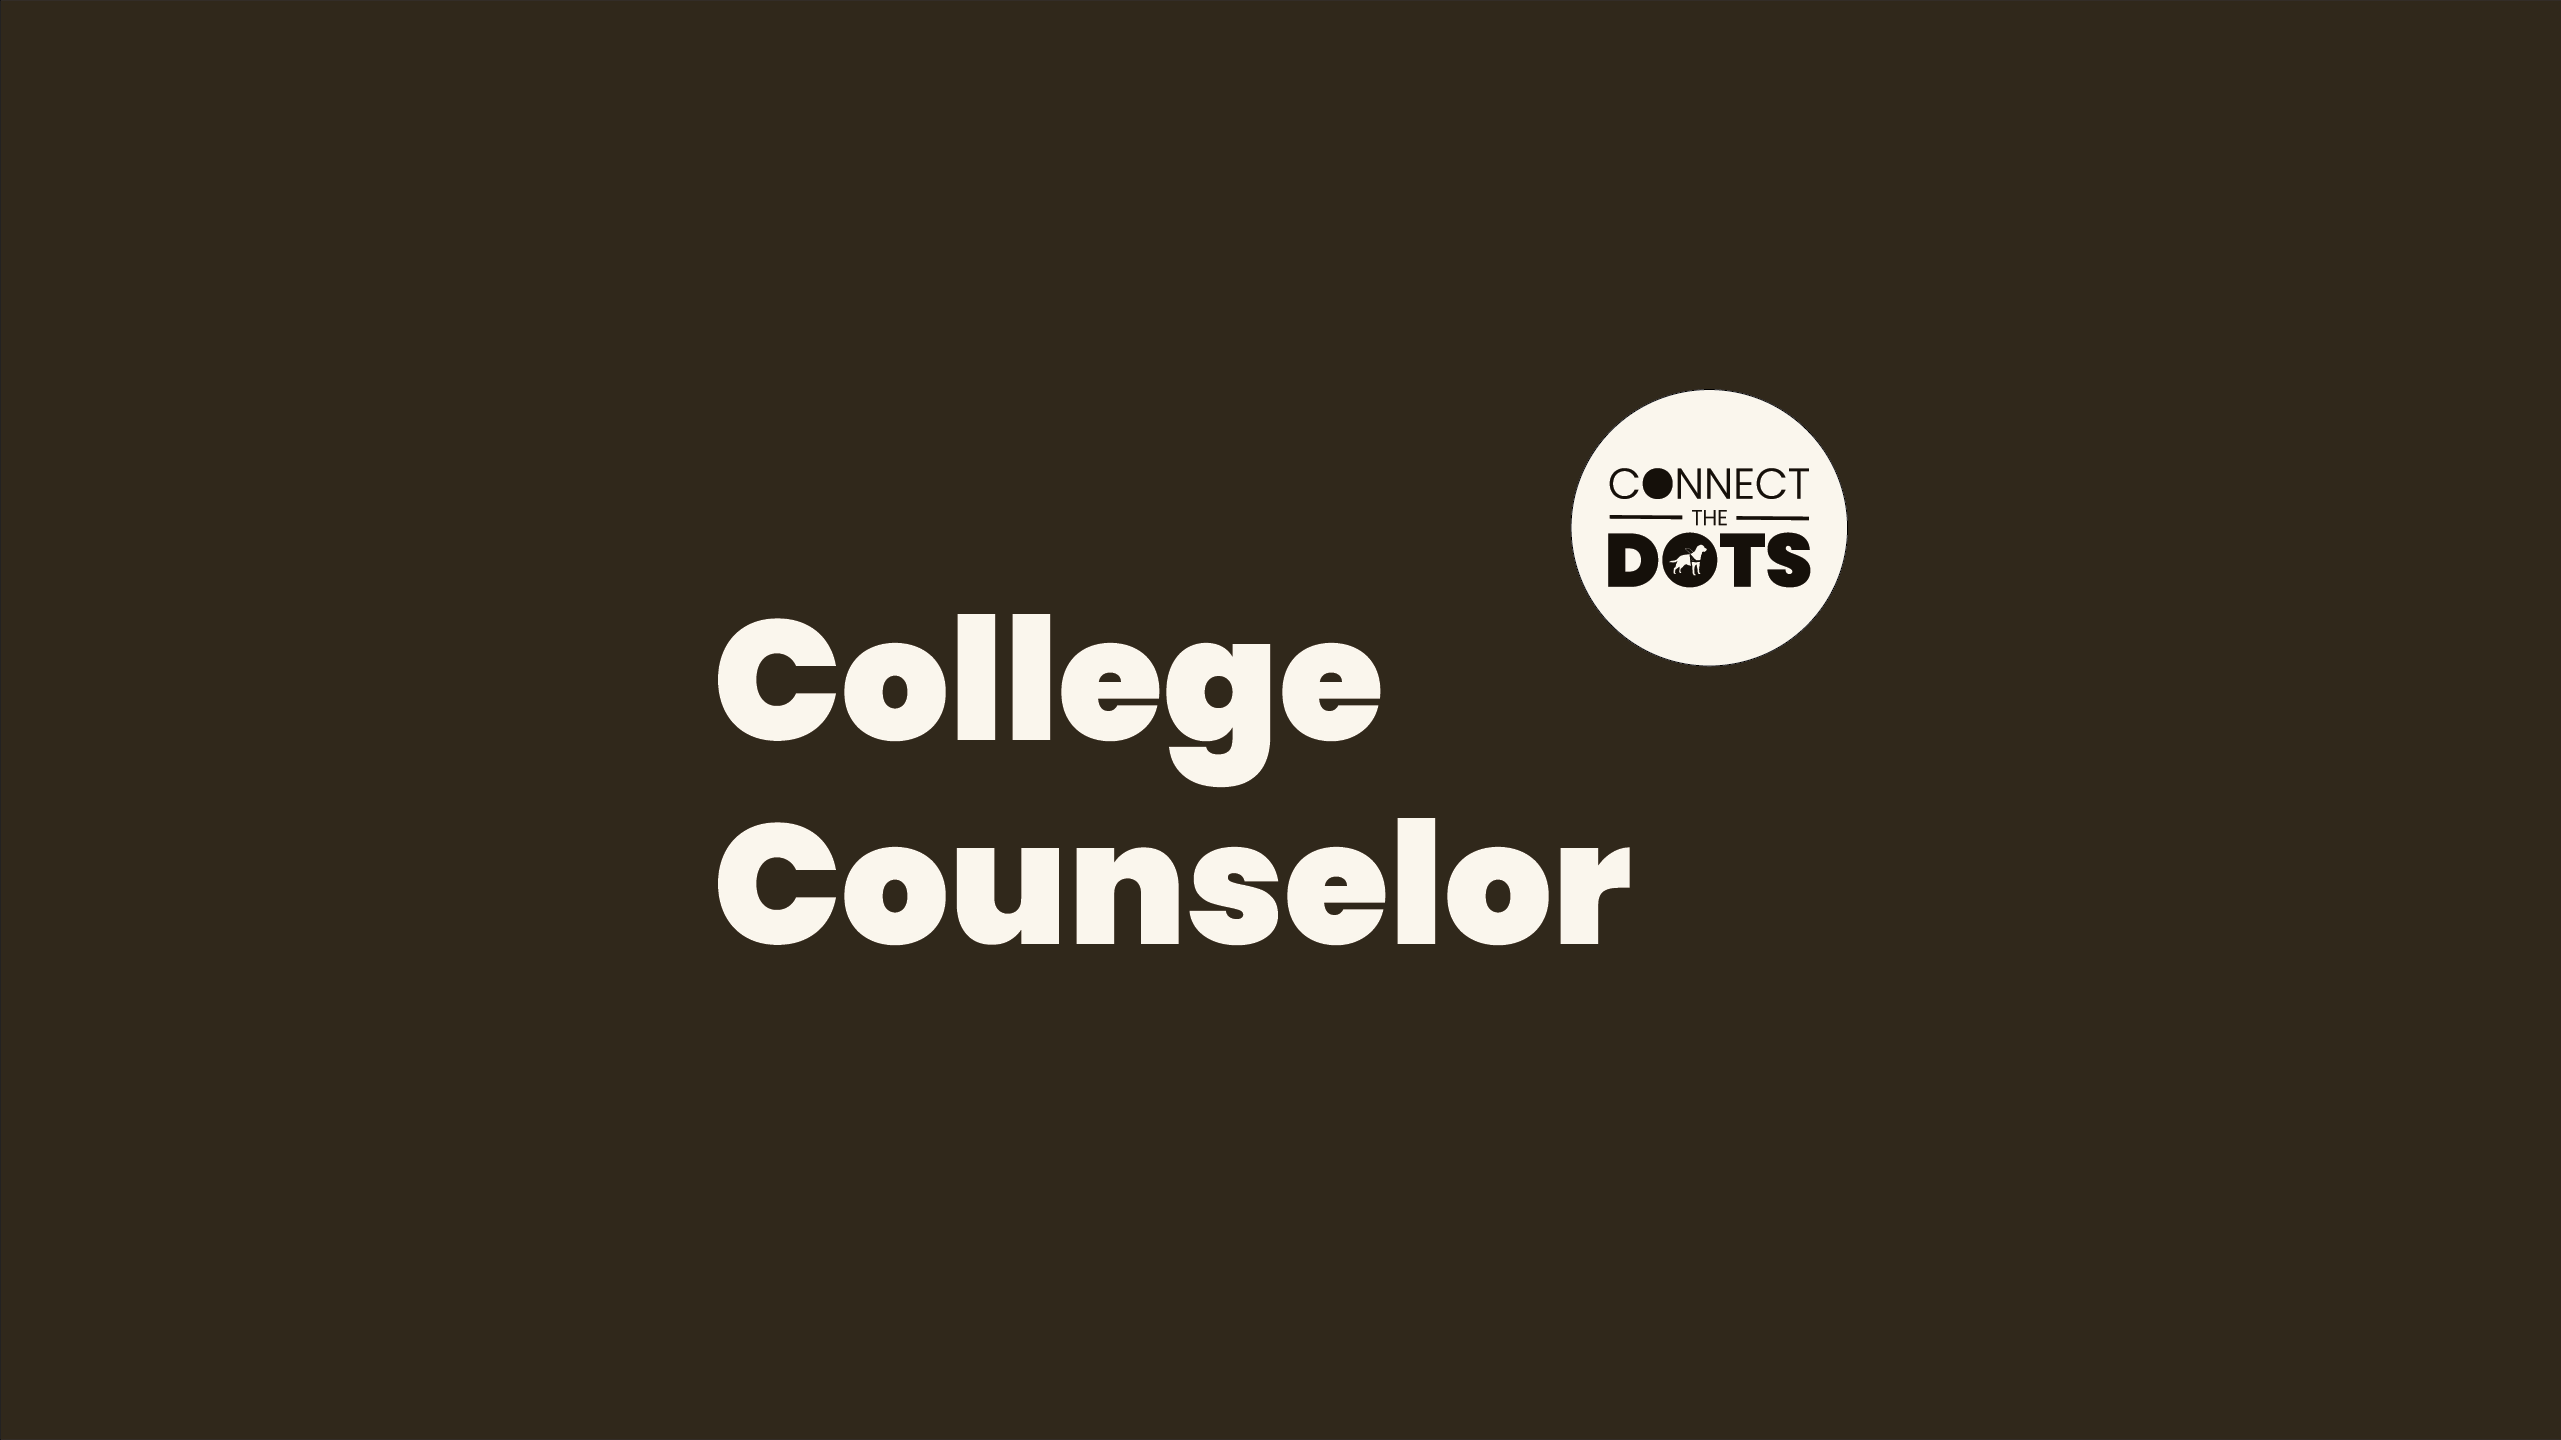 College Counselor - Blind and Visually Impaired Professionals